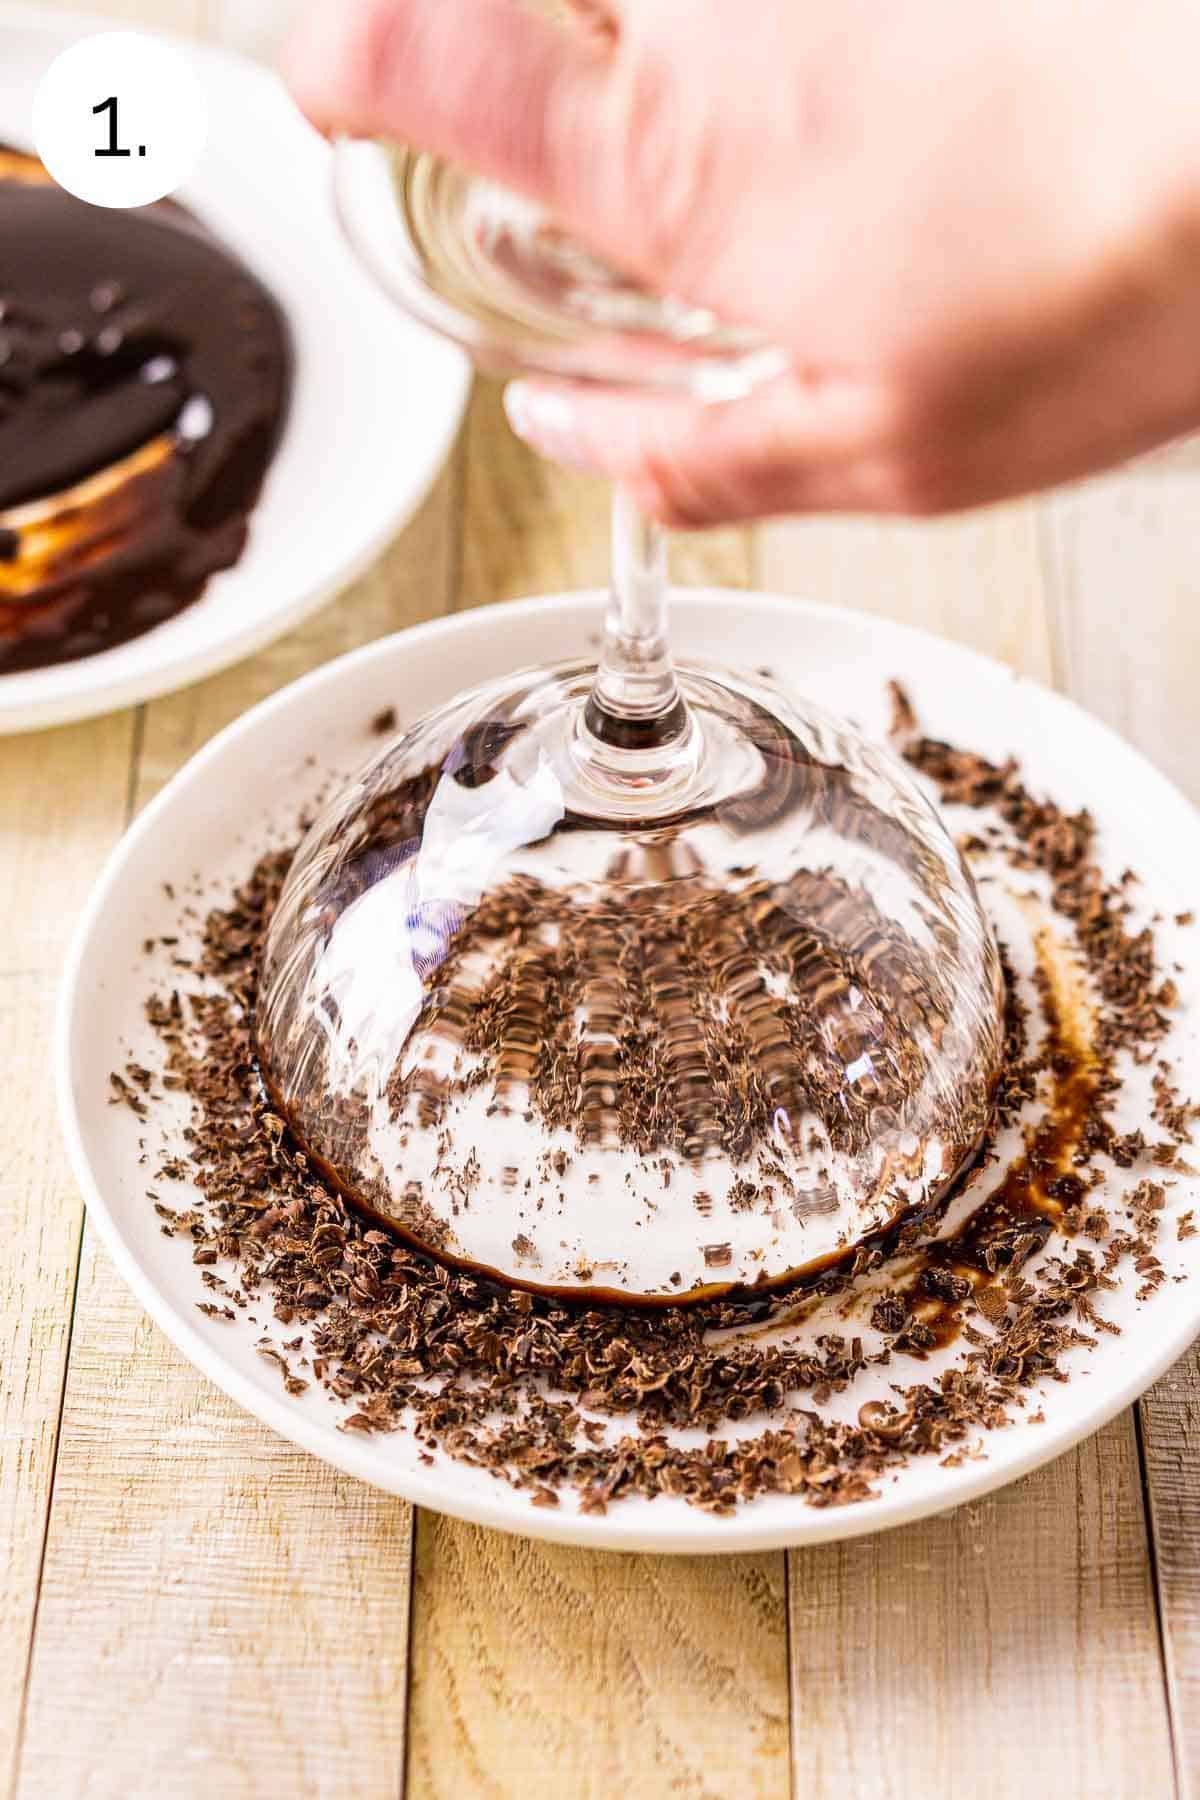 A hand dipping the rim of the martini glass into a small white plate of grated chocolate.